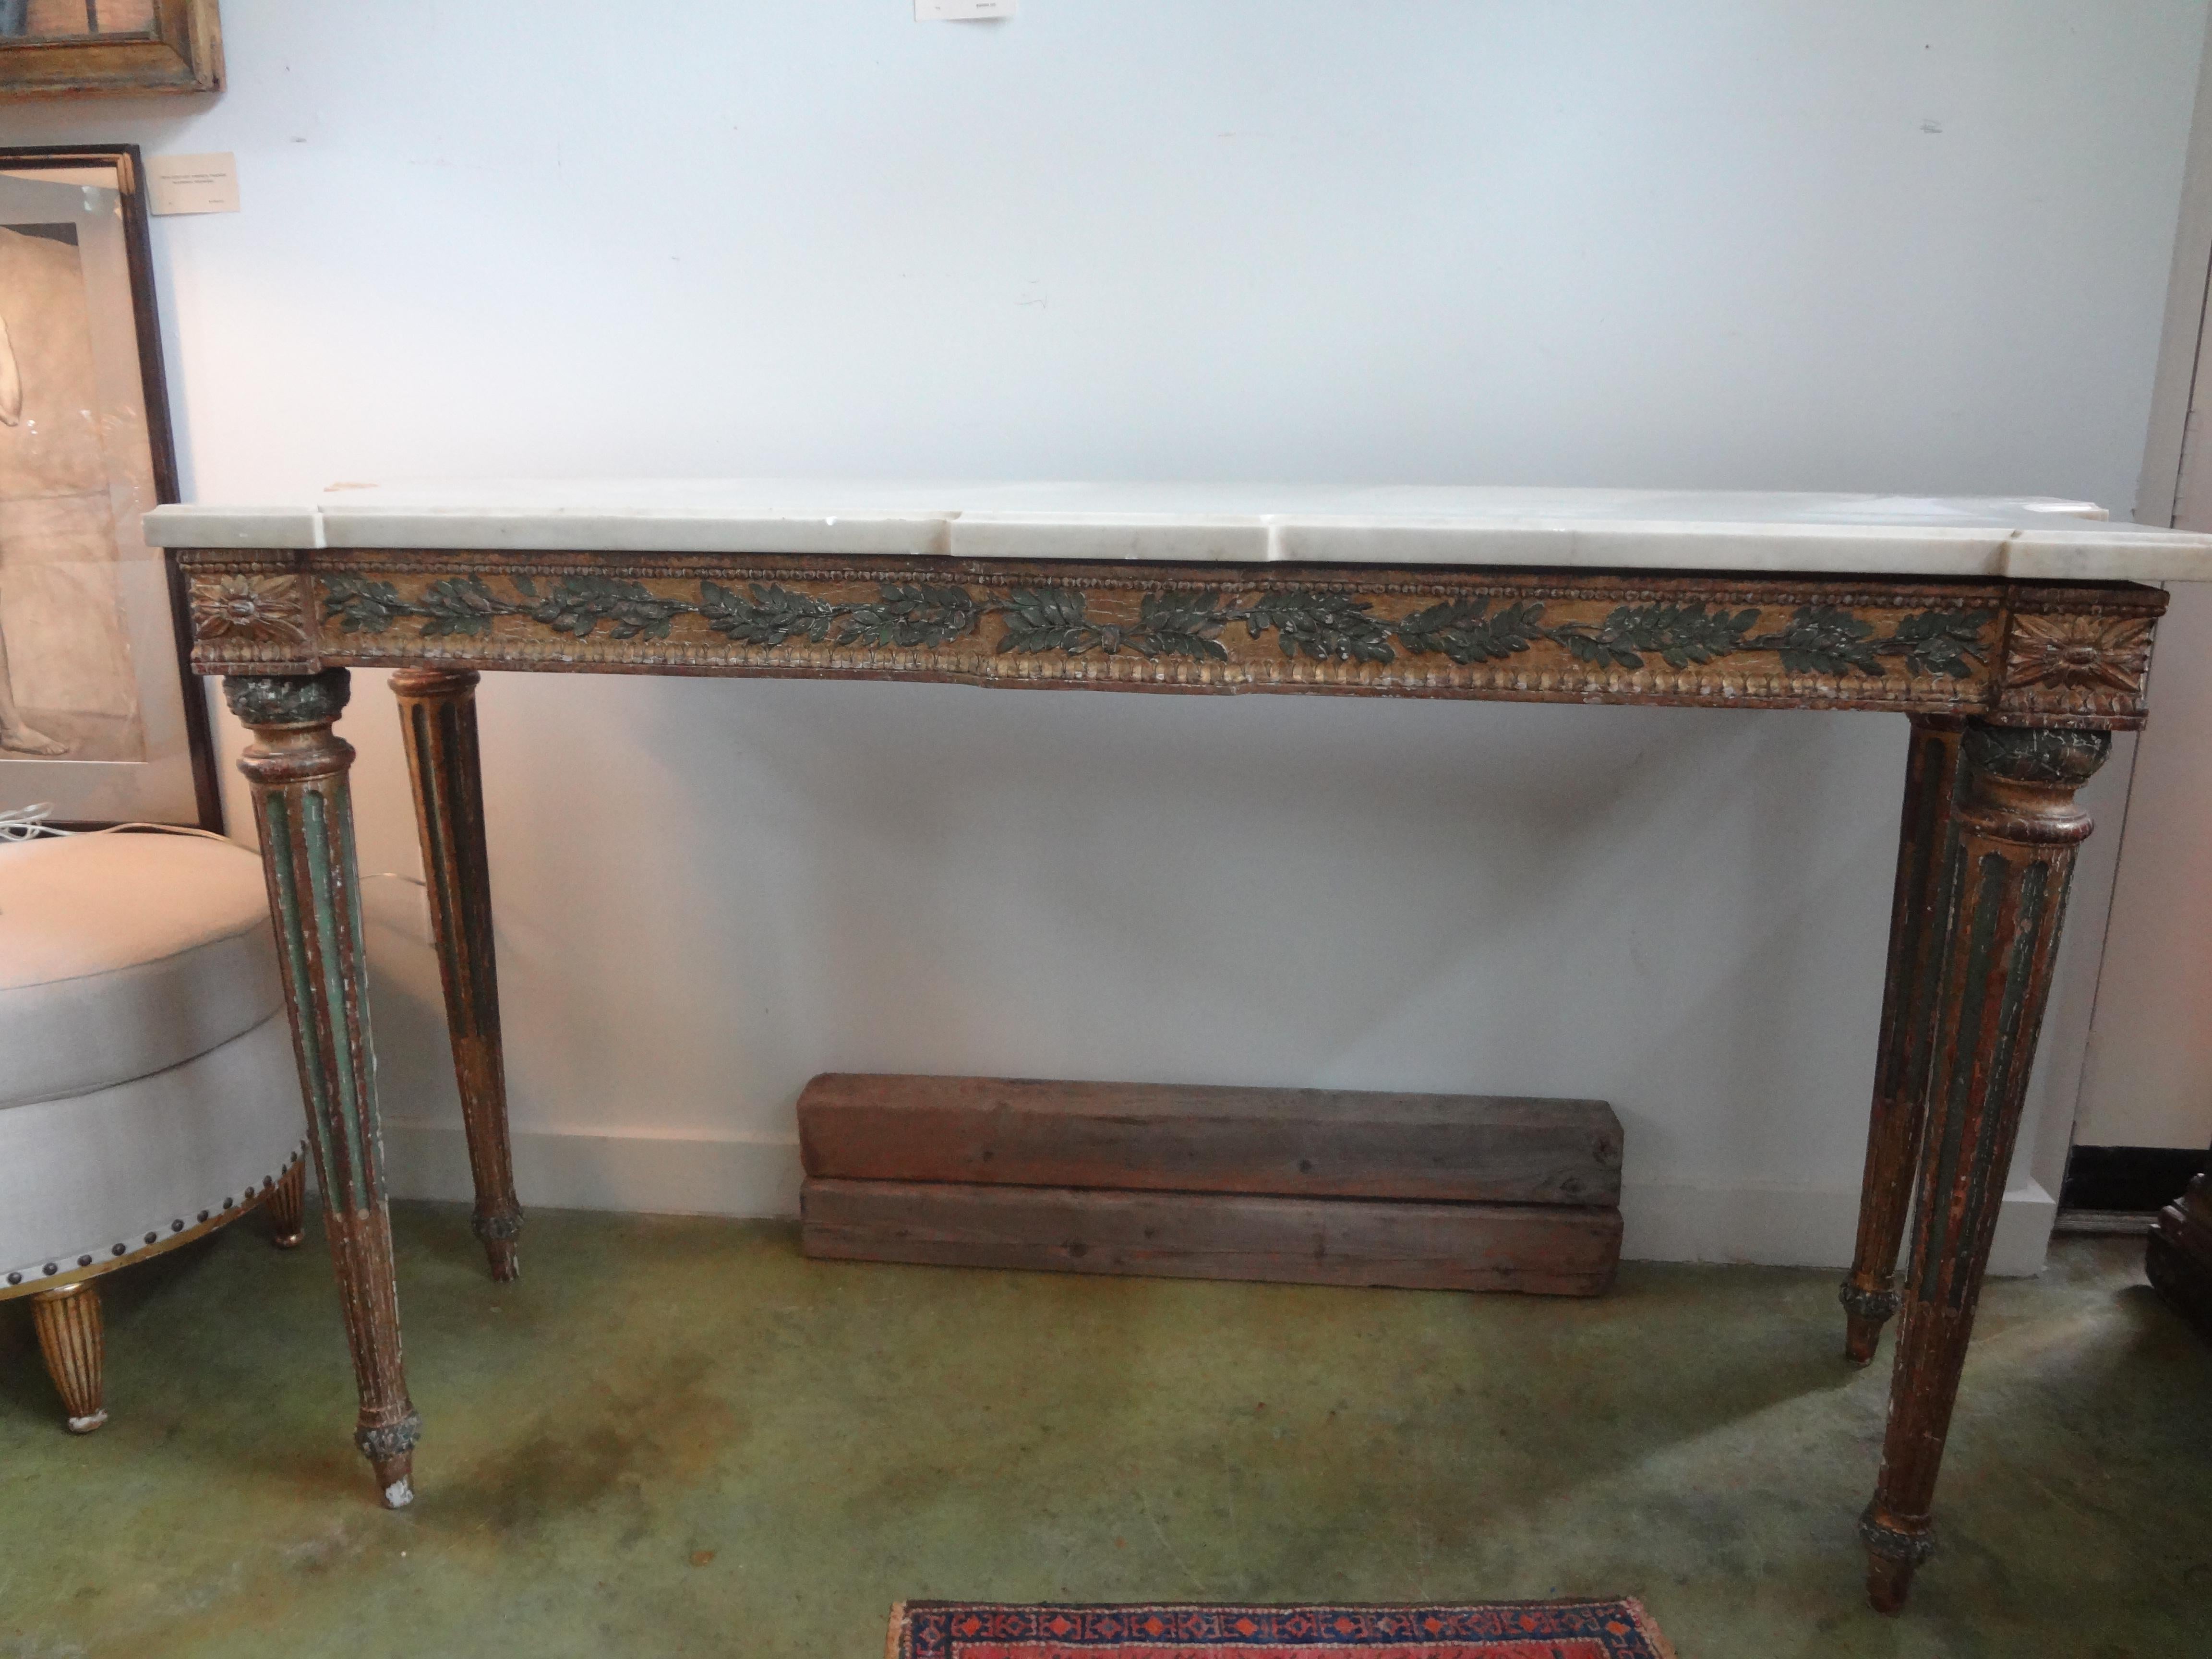 18th century Italian Louis XVI console table, painted and parcel gilt.  This stunning freestanding antique Italian console table has a raised leaf design on the apron, tapered legs and a Carrara marble top.